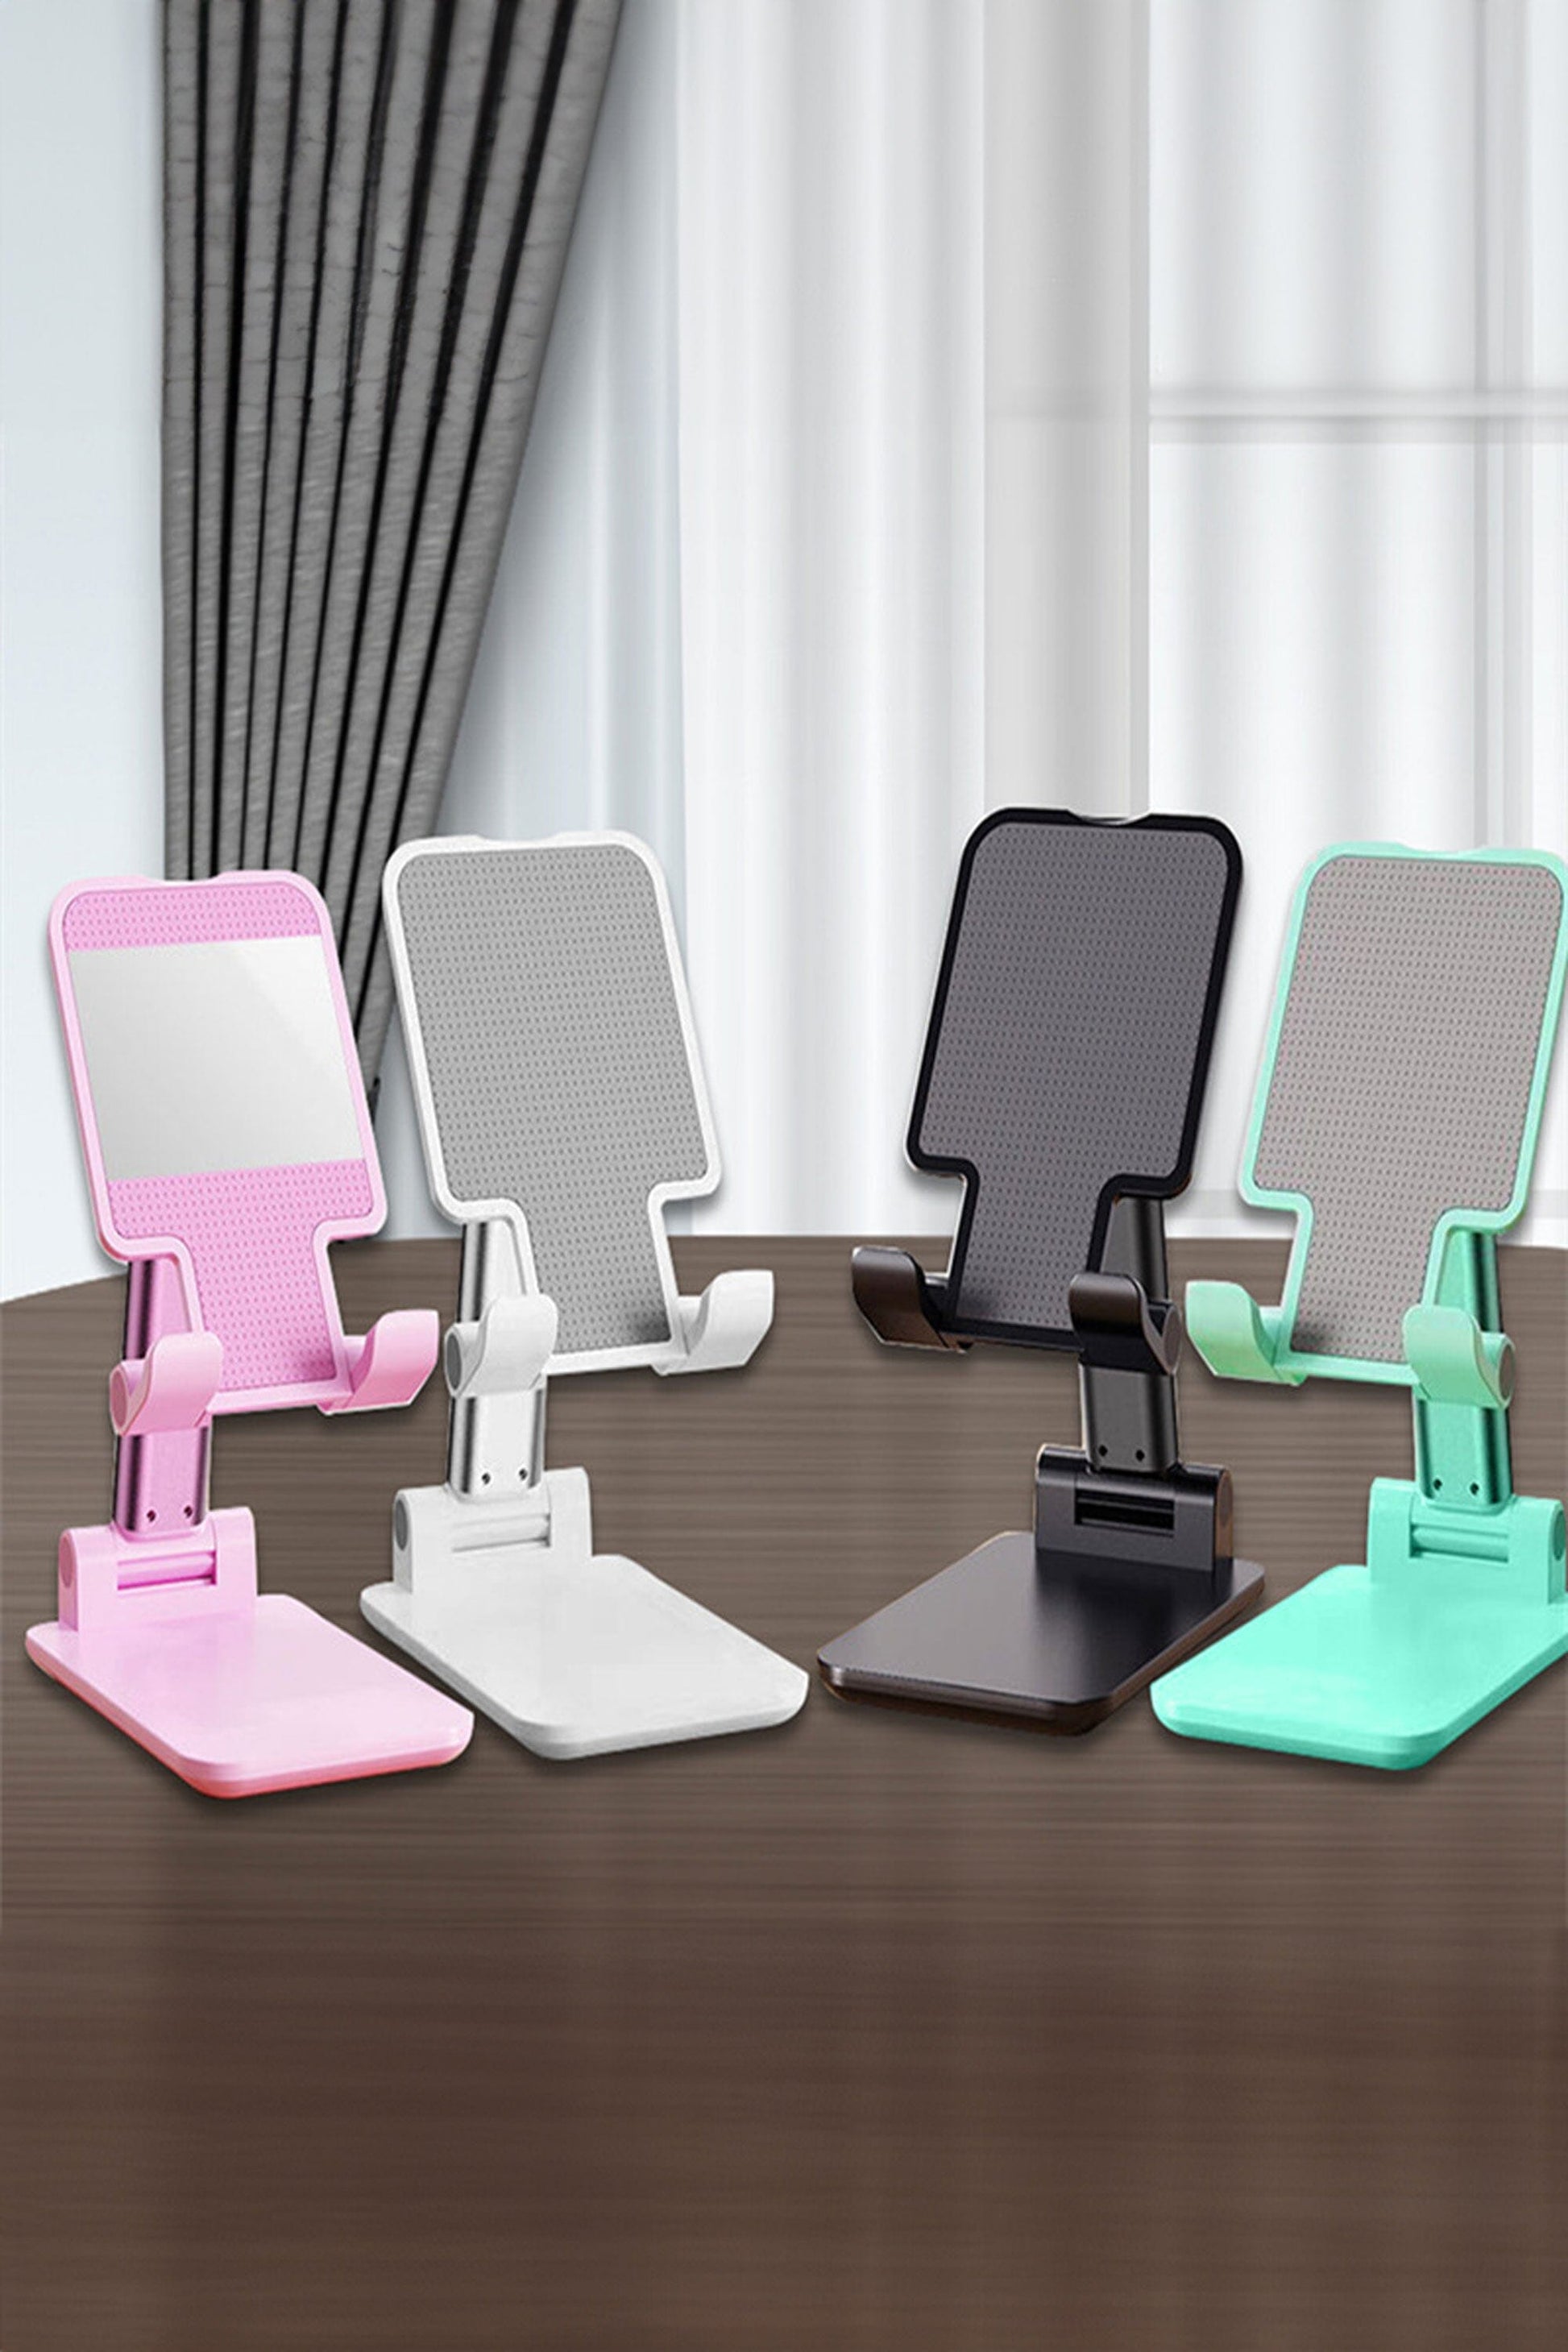 Adjustable and Flexible Mobile Phone Stand